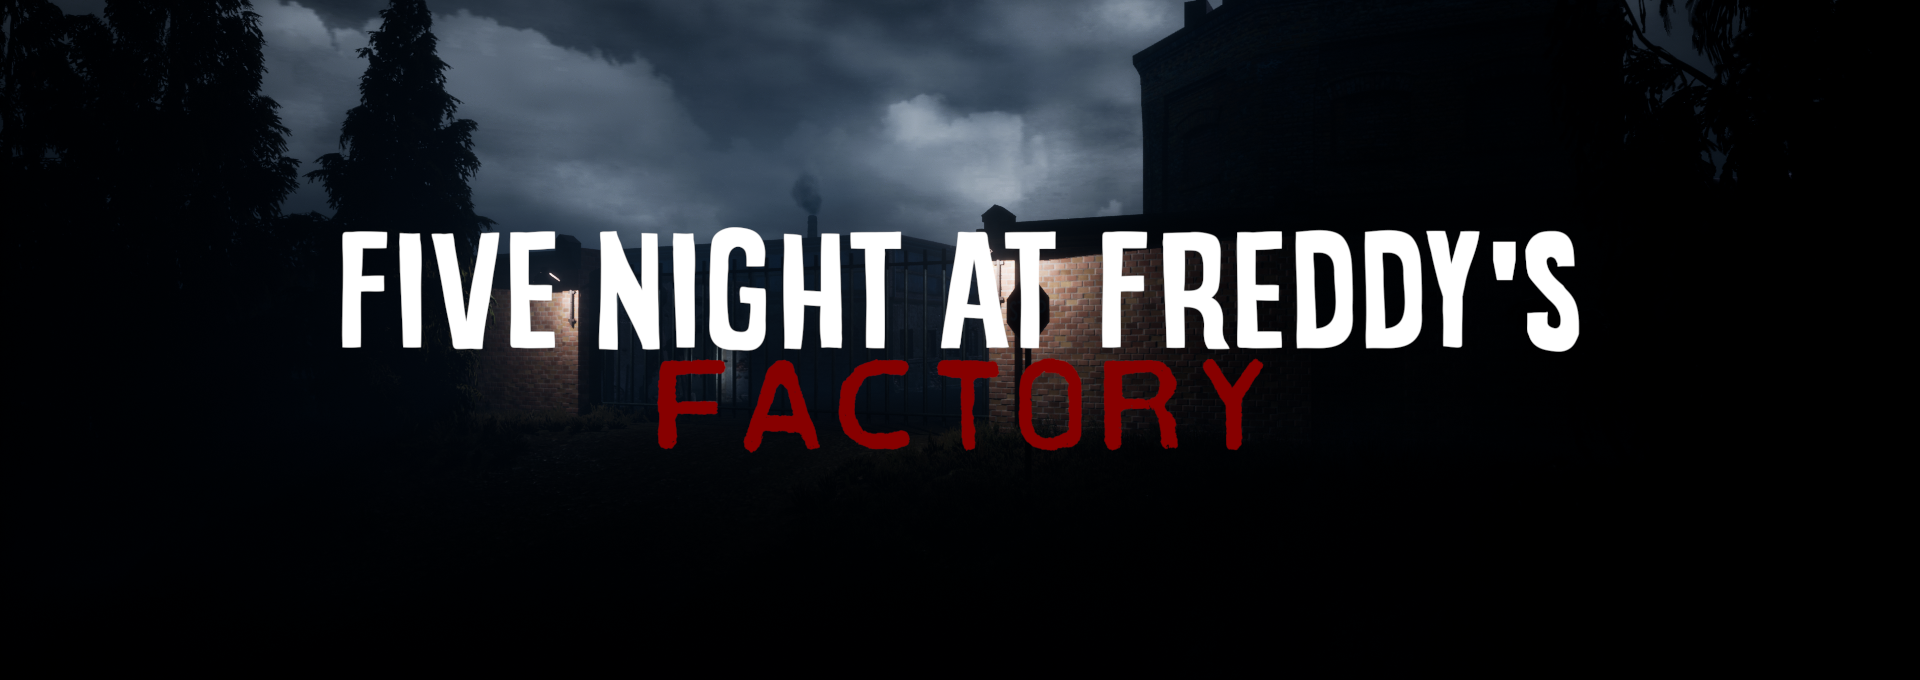 Five Night At Freddy's Factory